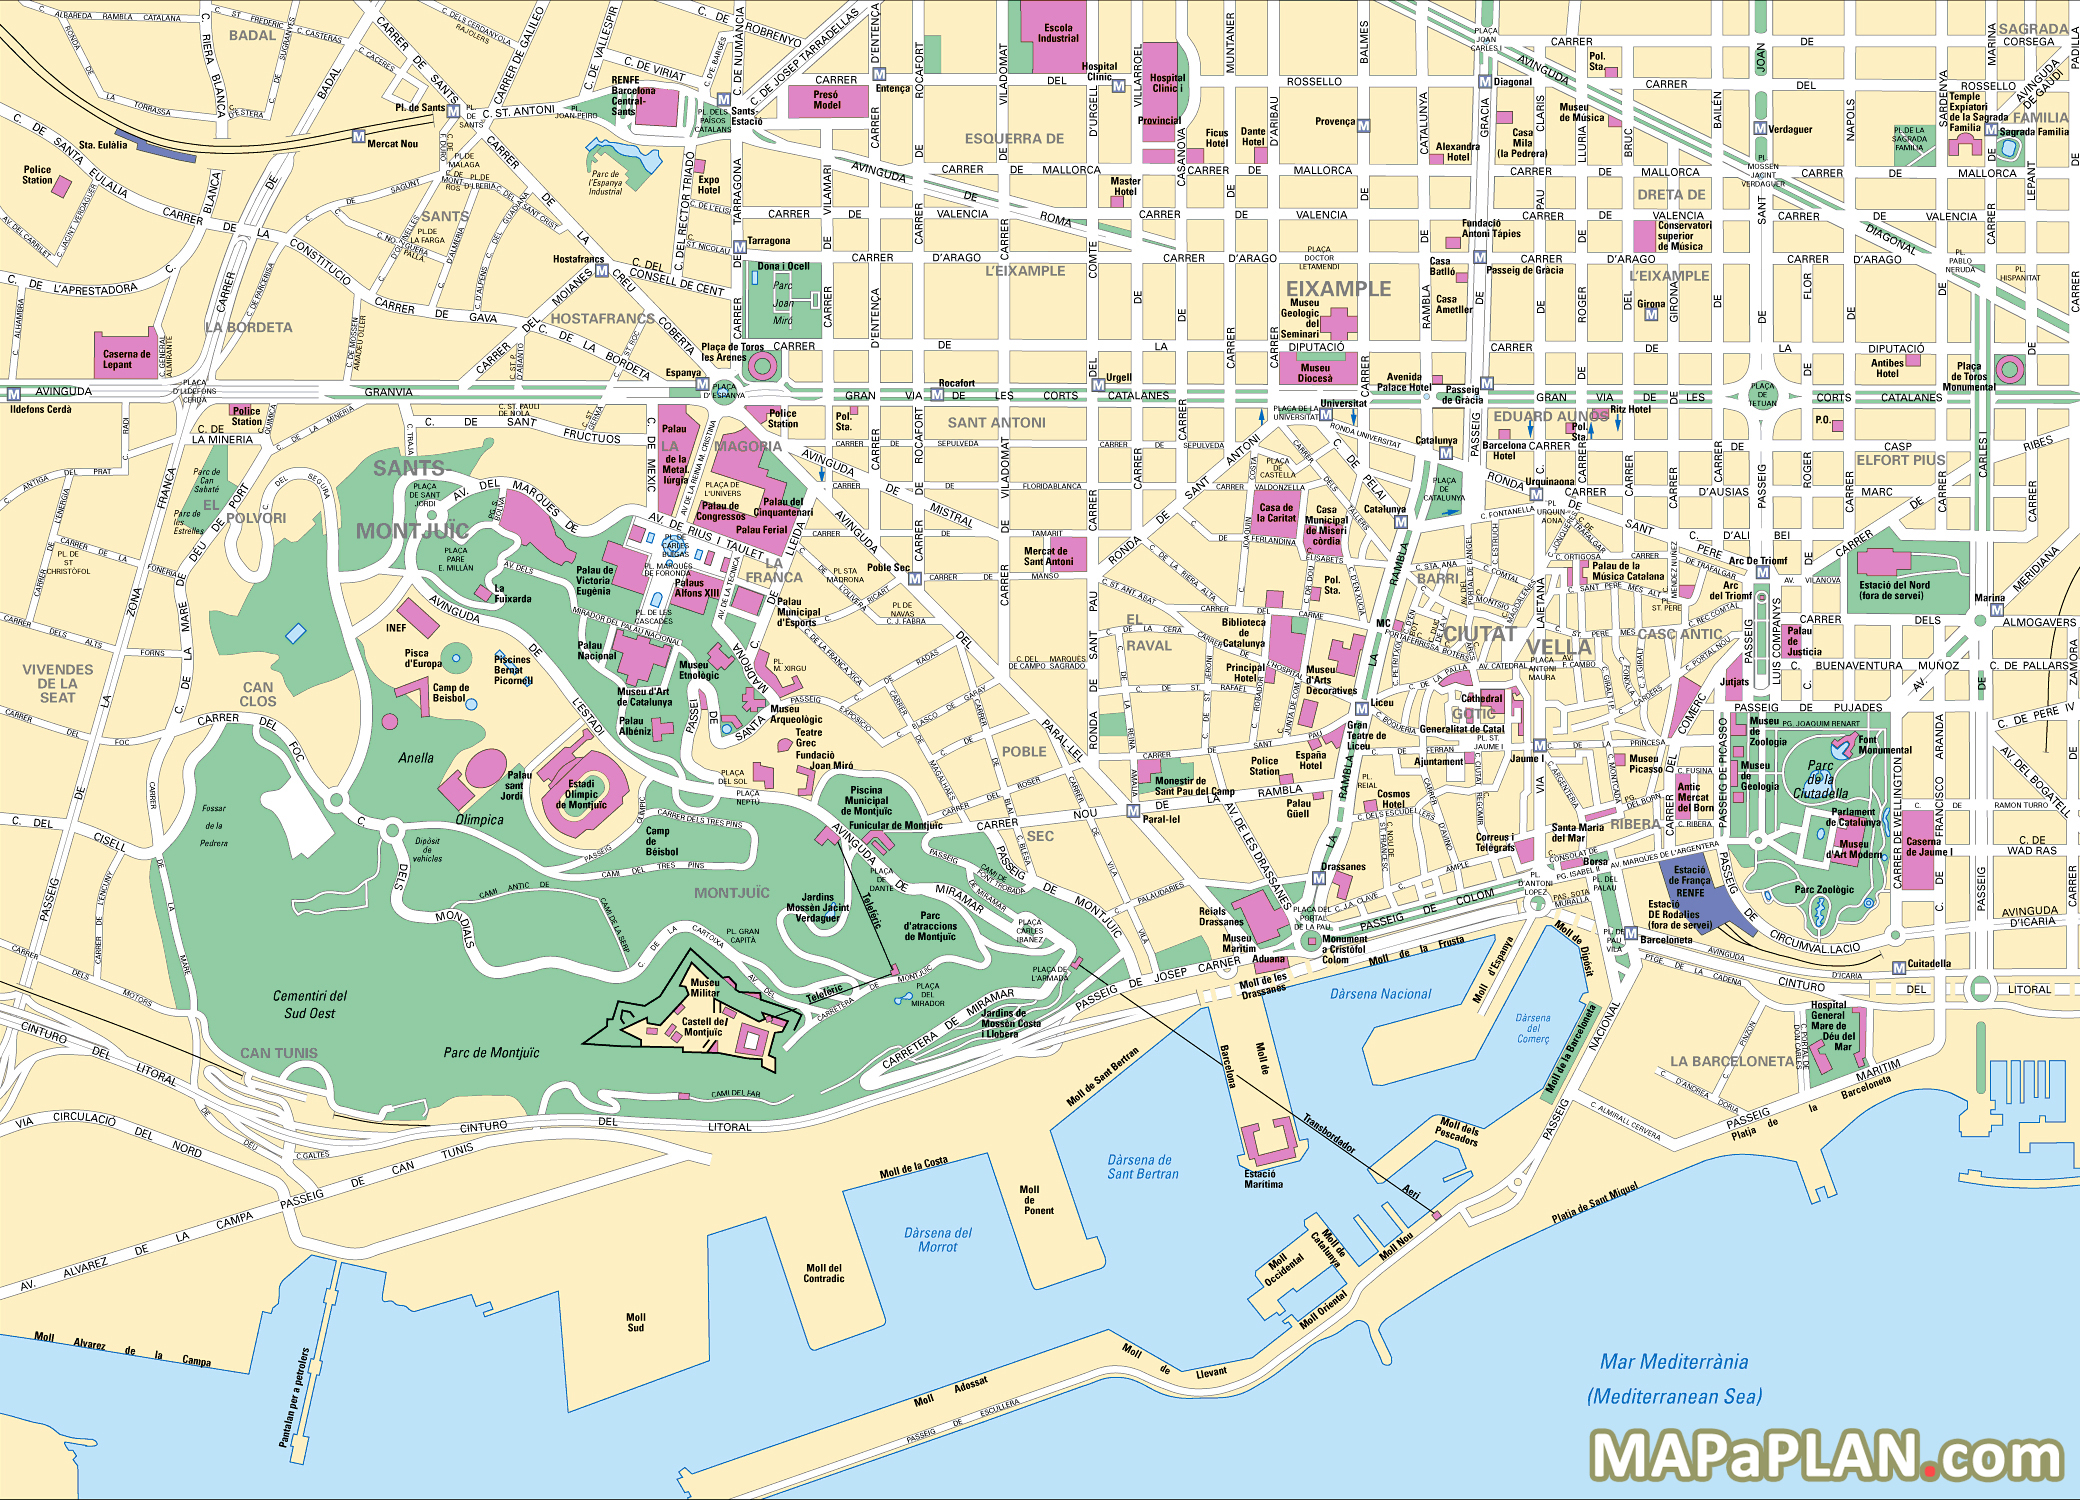 Central Barcelona with Las Ramblas must see points of interest Barcelona top tourist attractions map